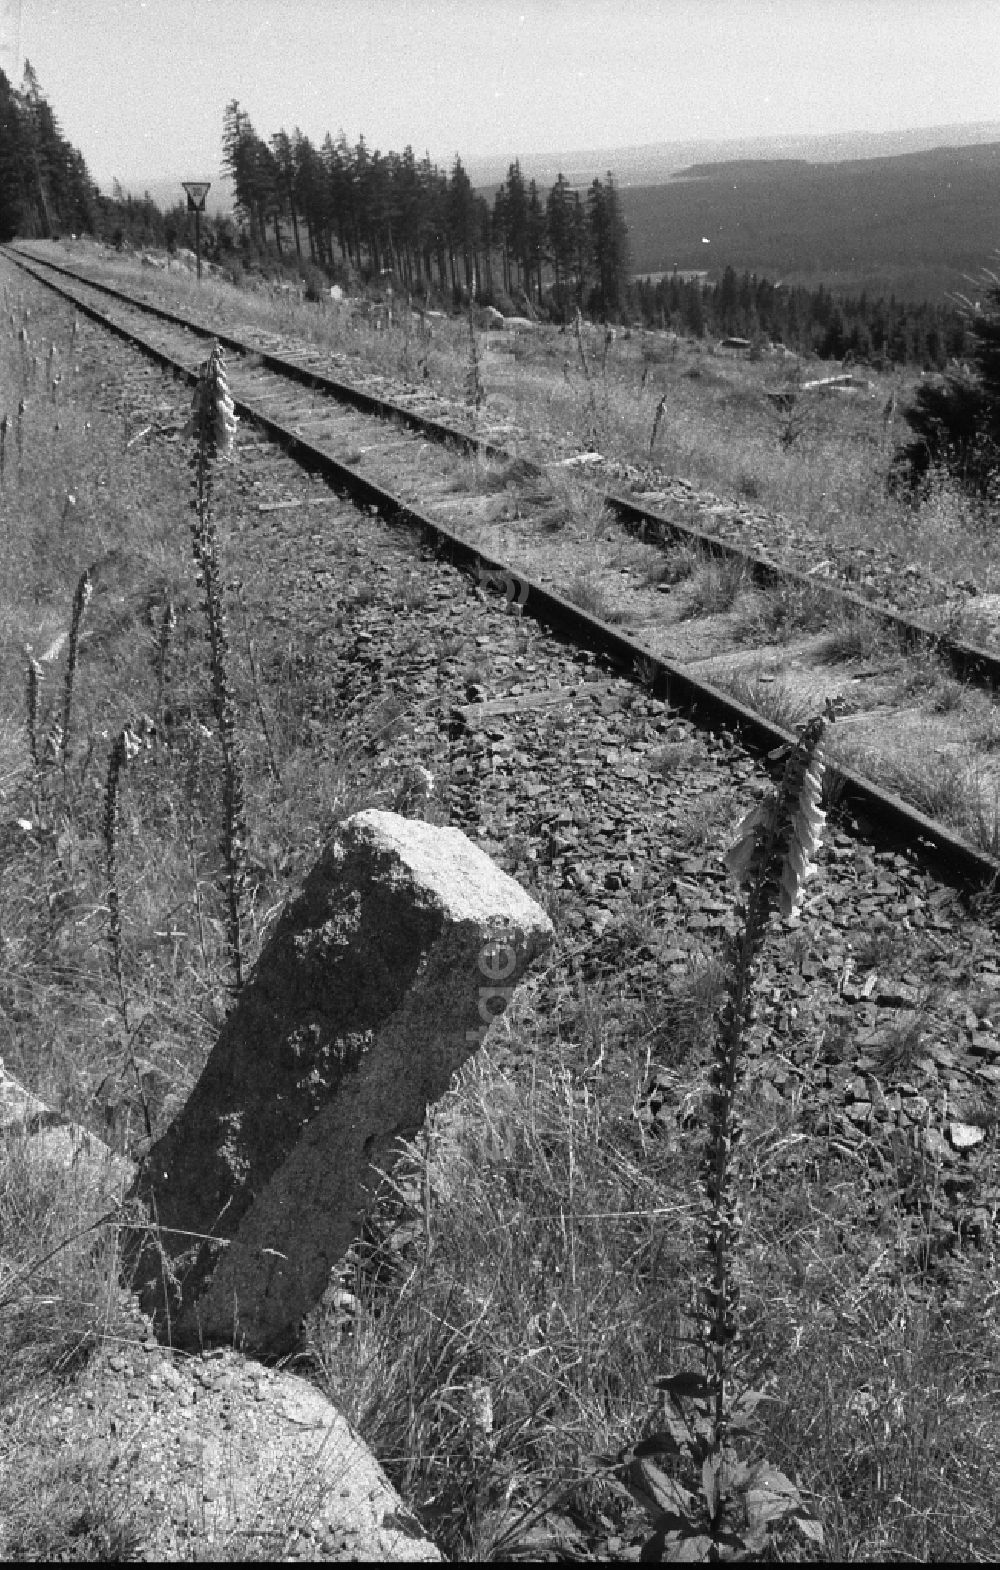 Schierke: Neglected track layout and track systems on the railway line on the summit plateau of the Brocken after its release for civilian visitor traffic in Schierke in the Harz in the state of Saxony-Anhalt in the area of the former GDR, German Democratic Republic